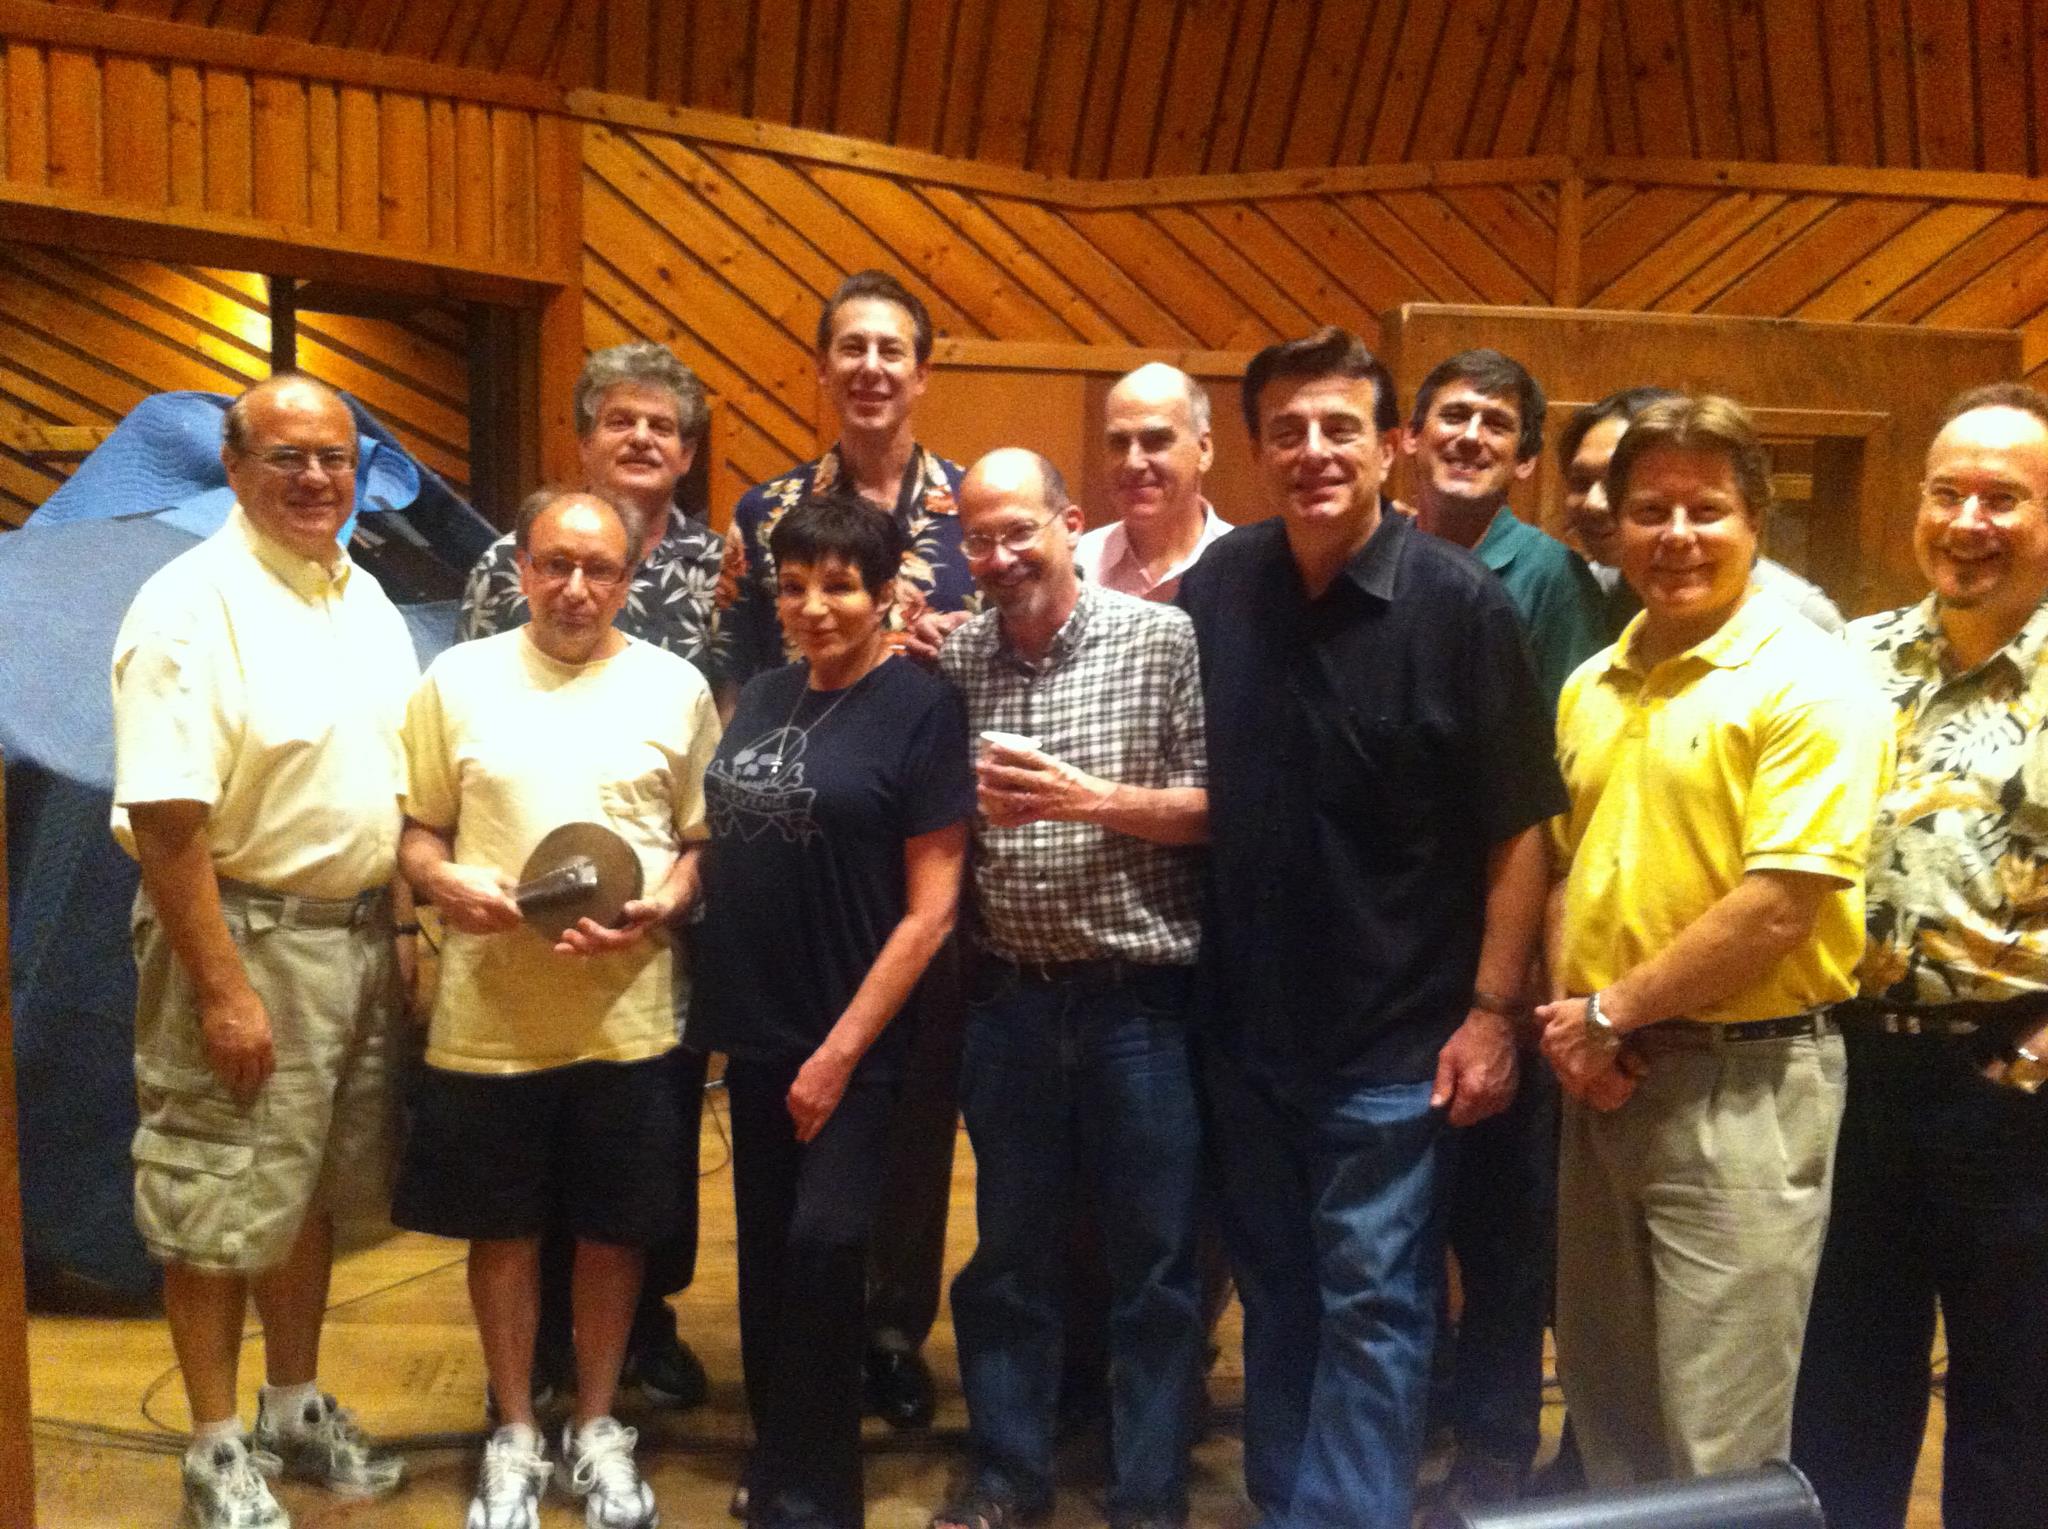 Vitaphone Project Co-Founder, bandleader Vince Giordano, with the Nighthawks and Liza Minelli recoding for the upcoming season of BOARDWALK EMPIRE